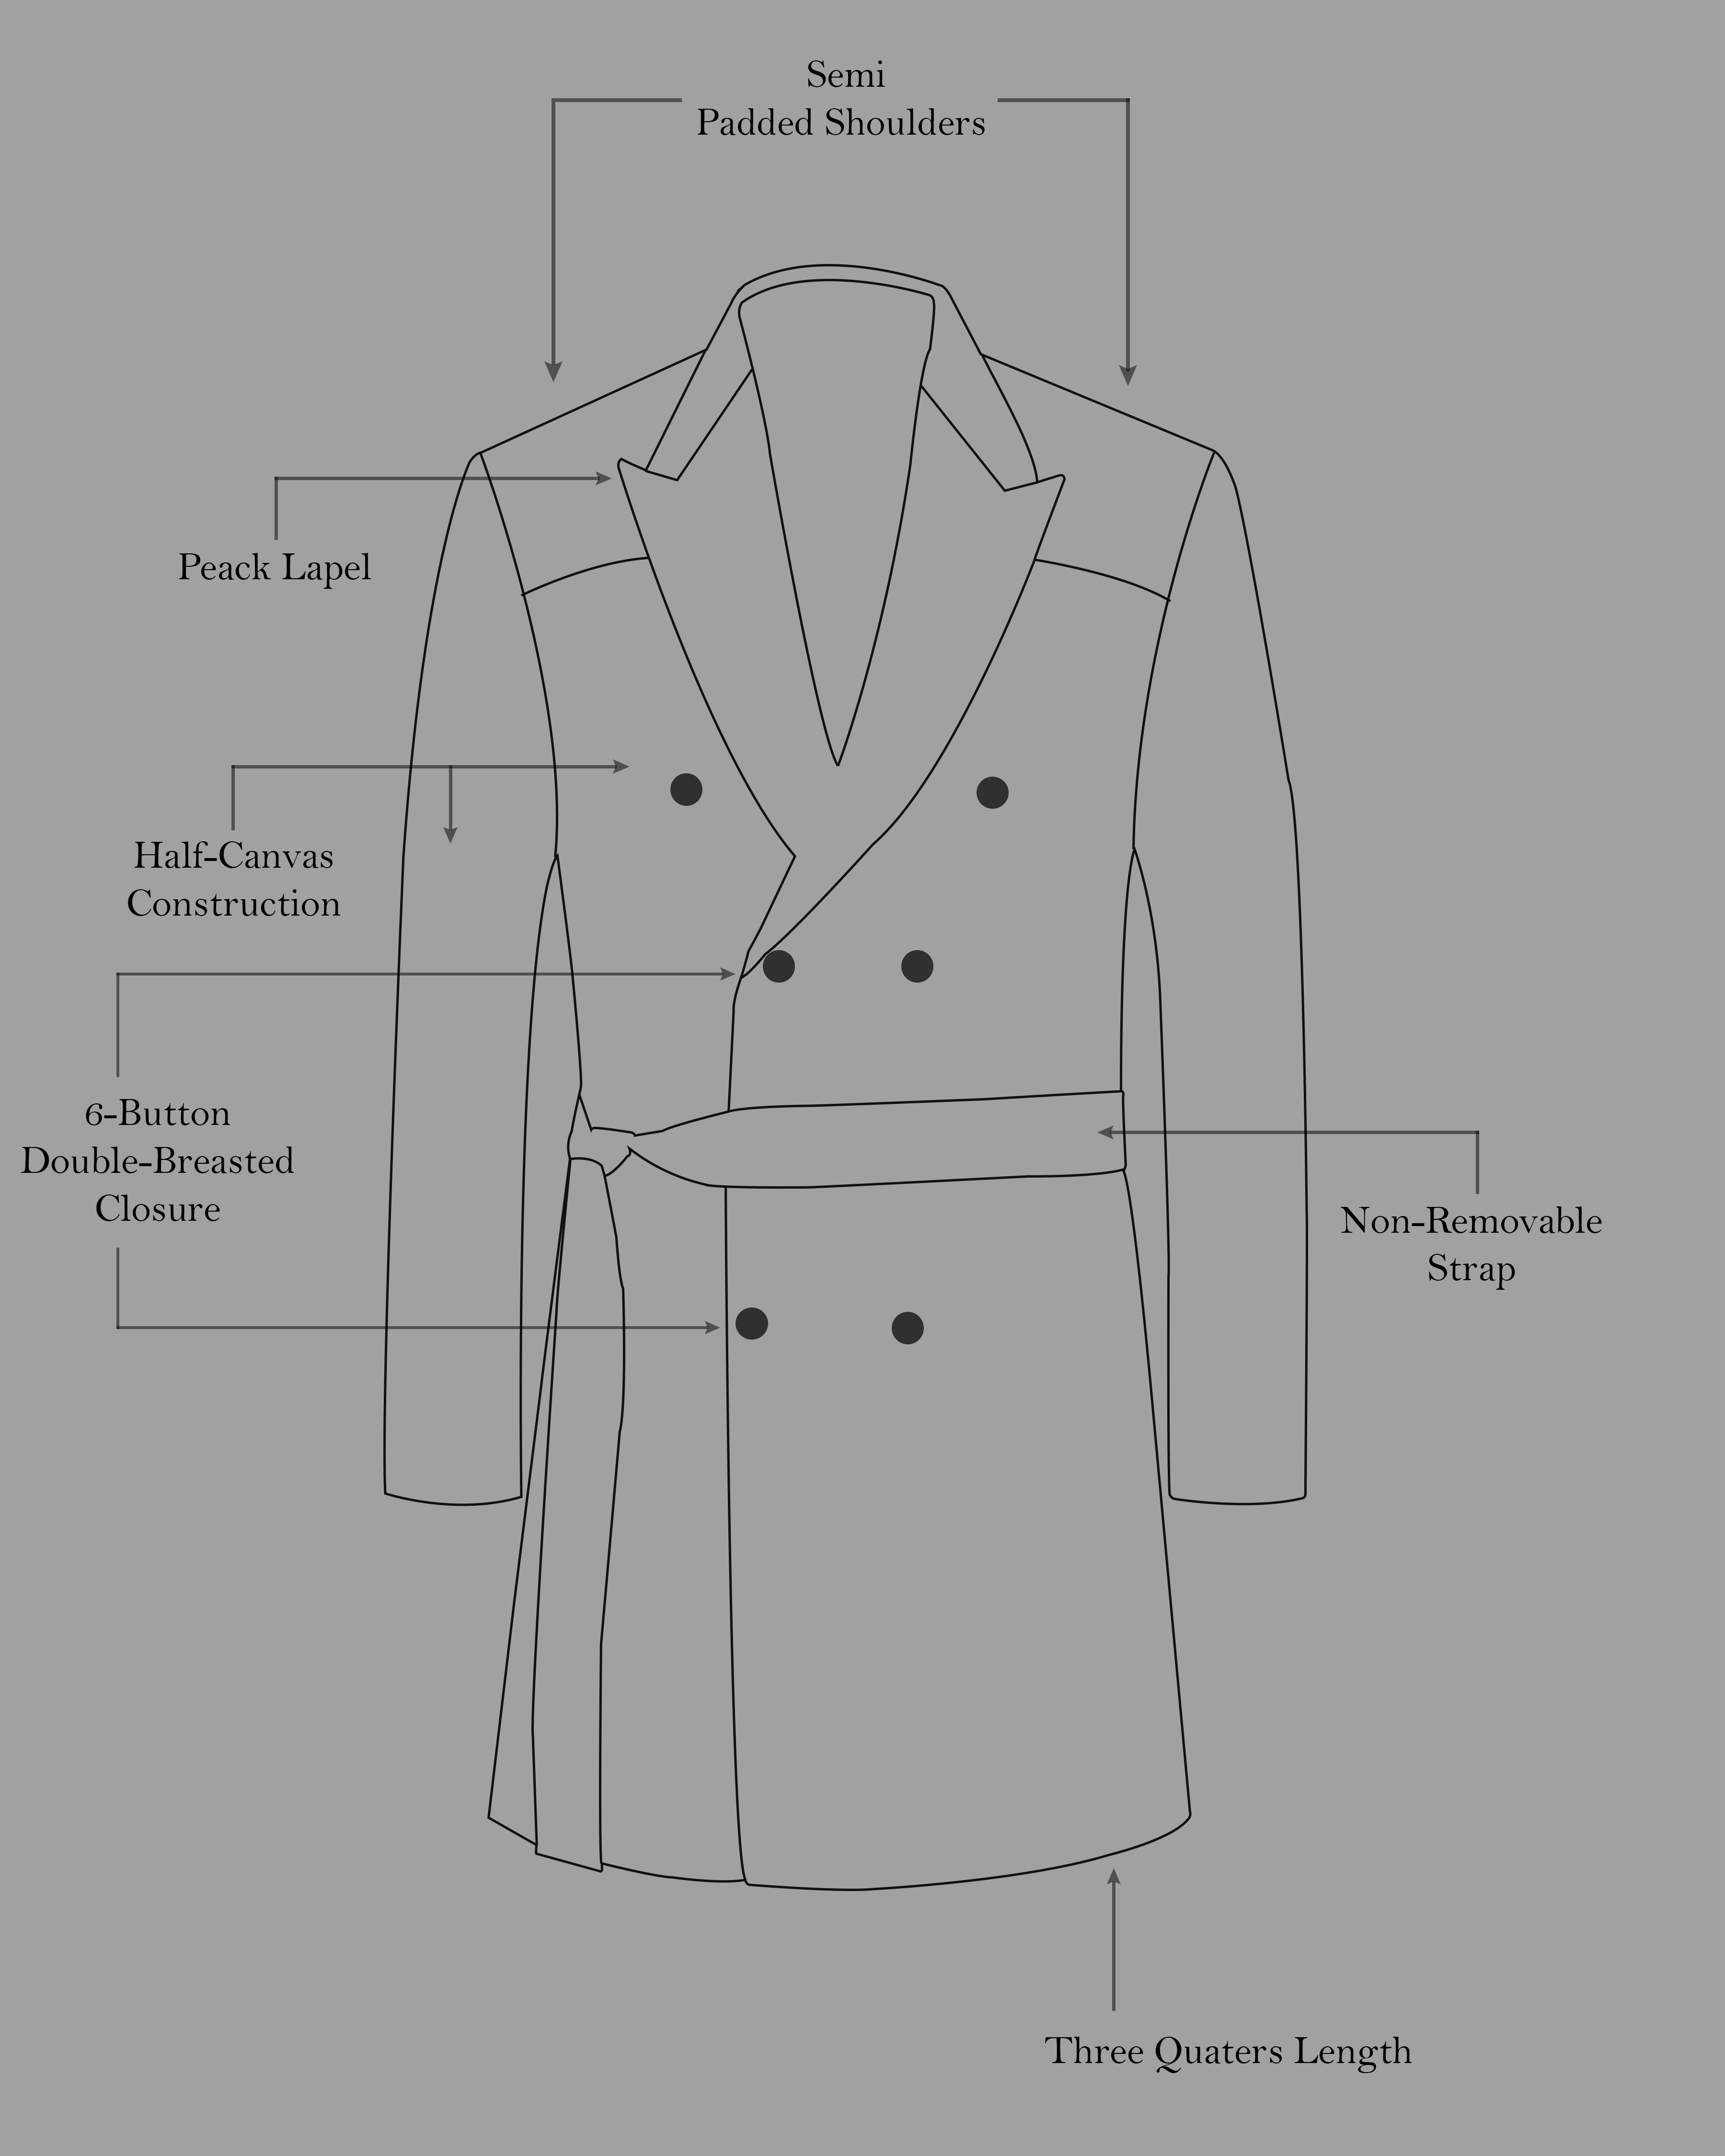 Jaguar Black with Concrete Gray Striped Double Breasted Trench Coat Belt Closure with Pant